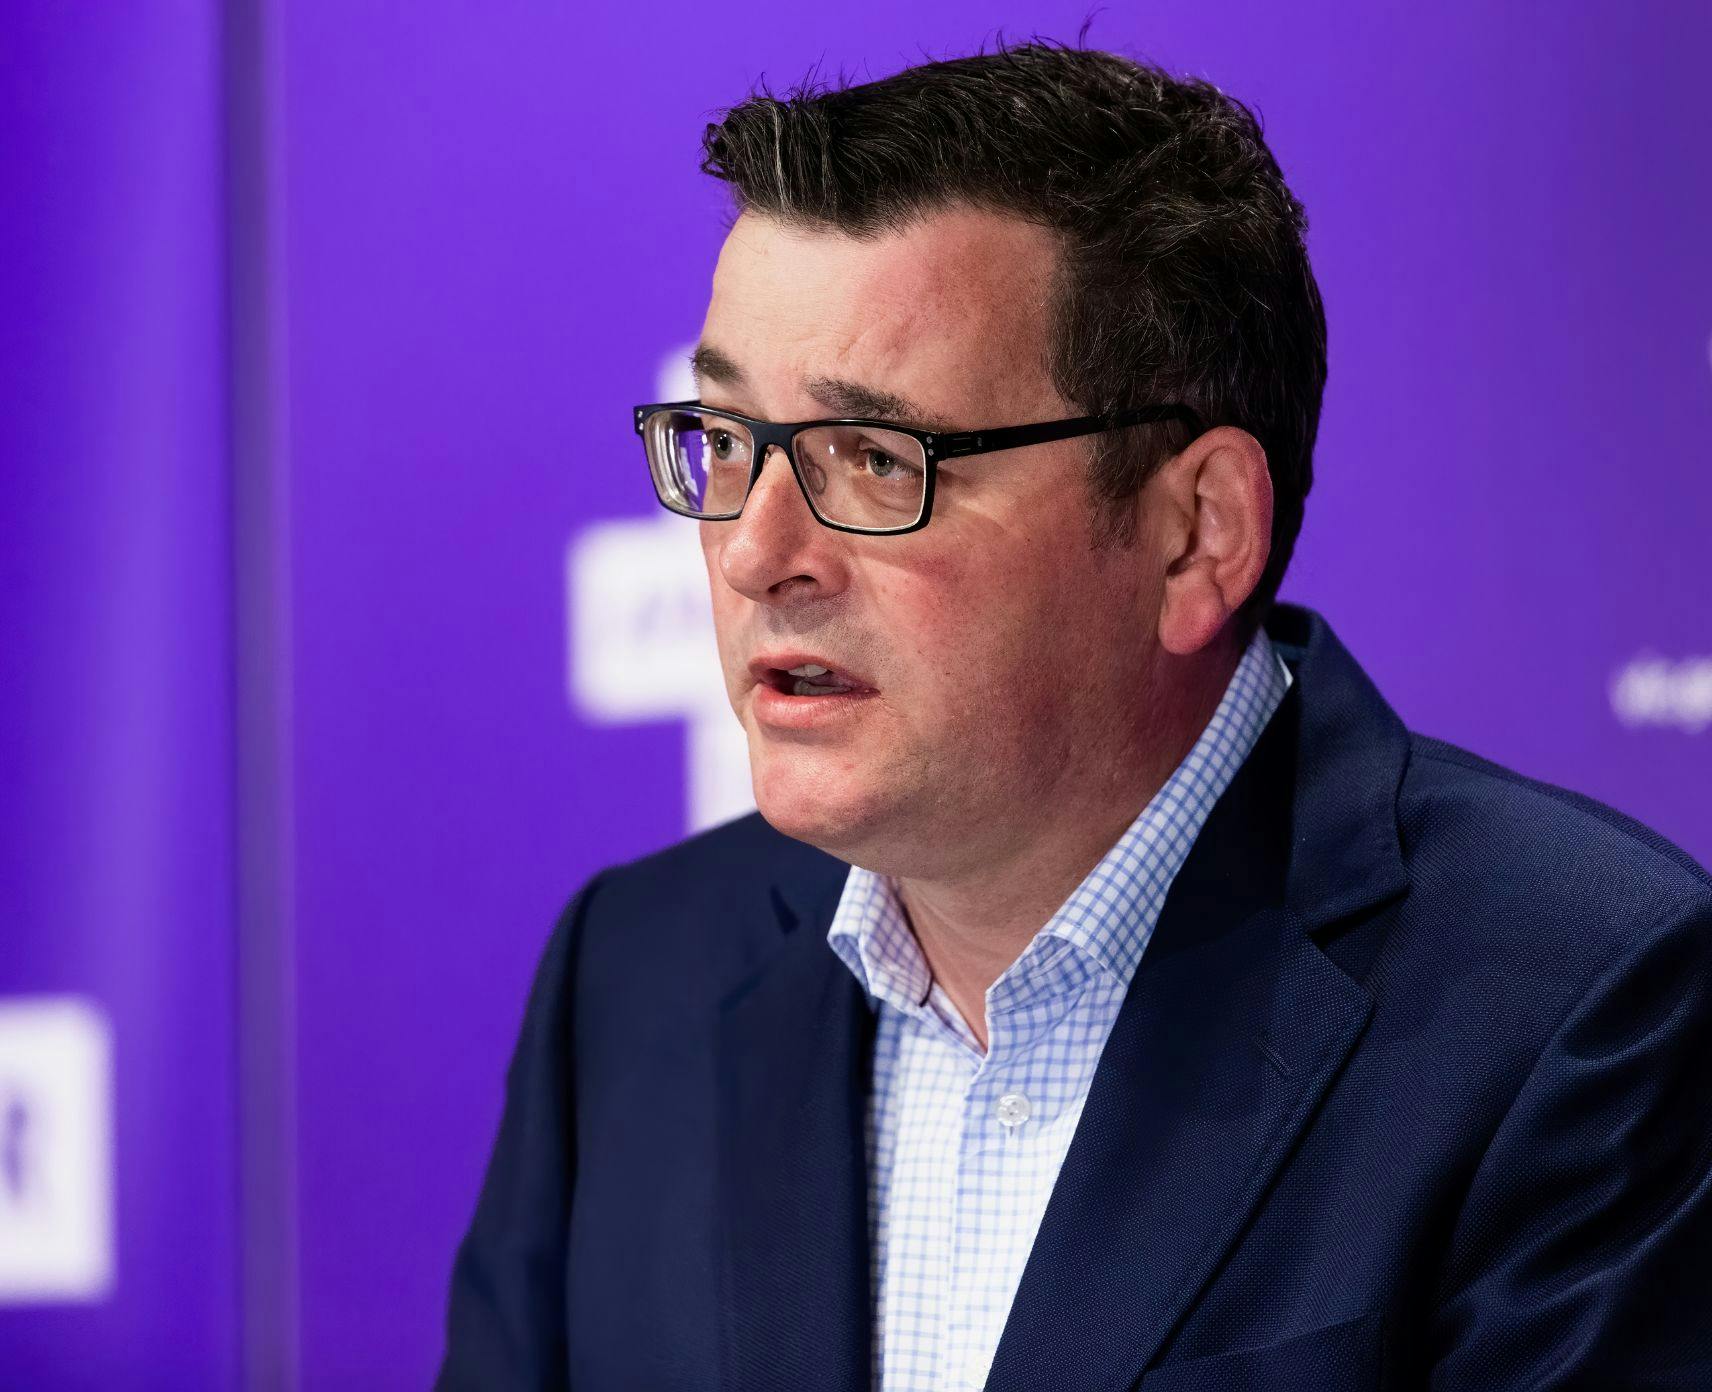 Daniel Andrews speaking at a press conference during the Covid-19 pandemic